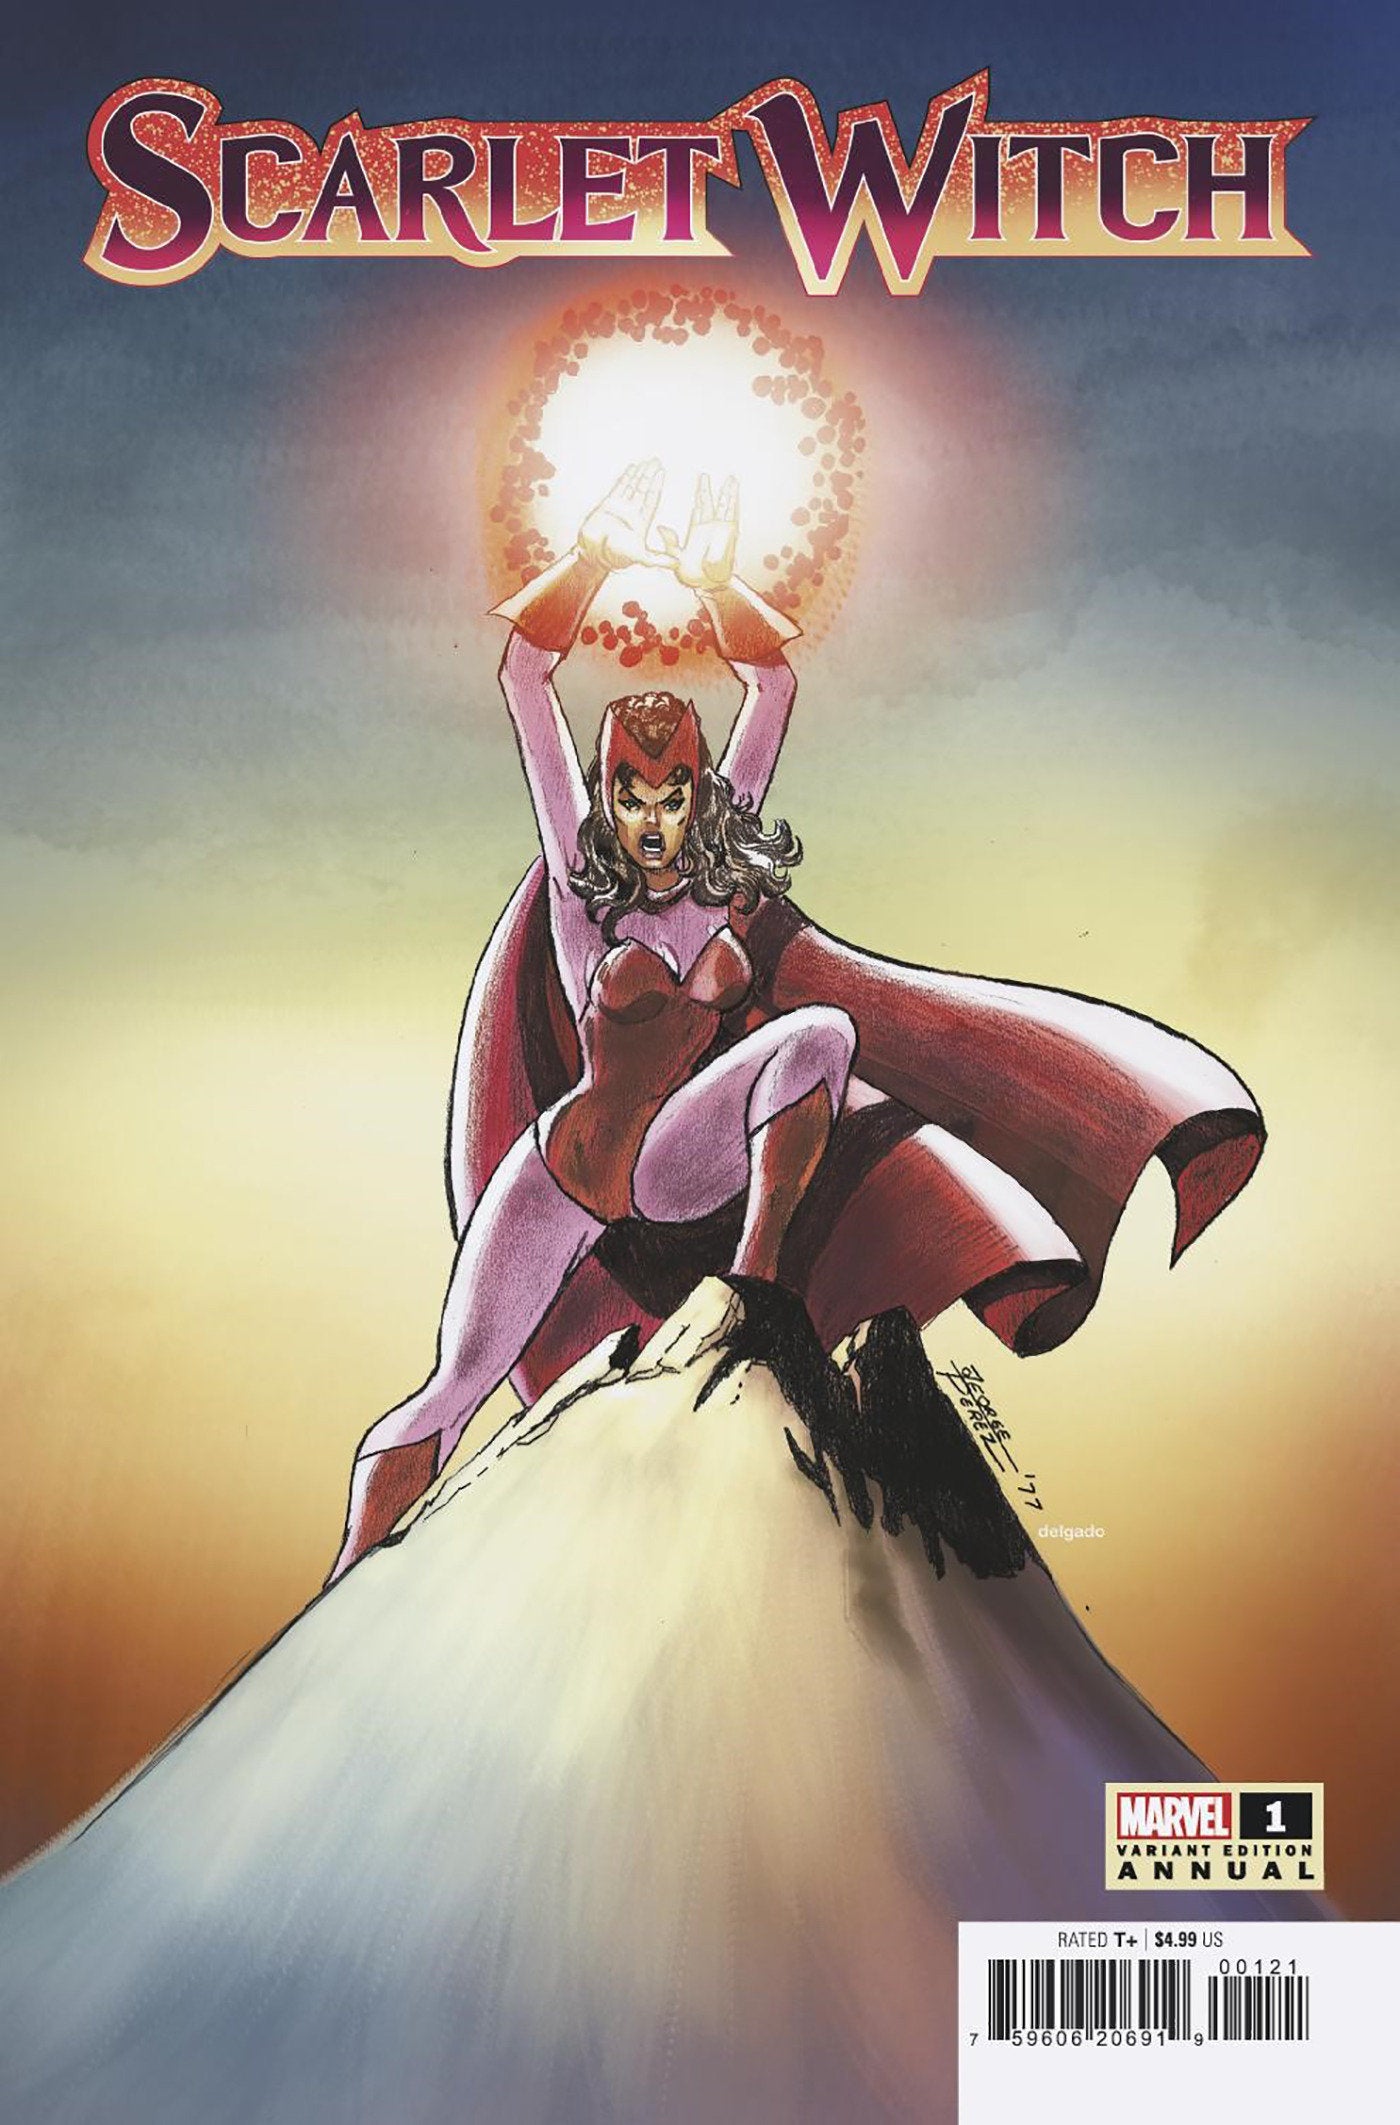 Scarlet Witch #2 Villa Stormbreakers Variant